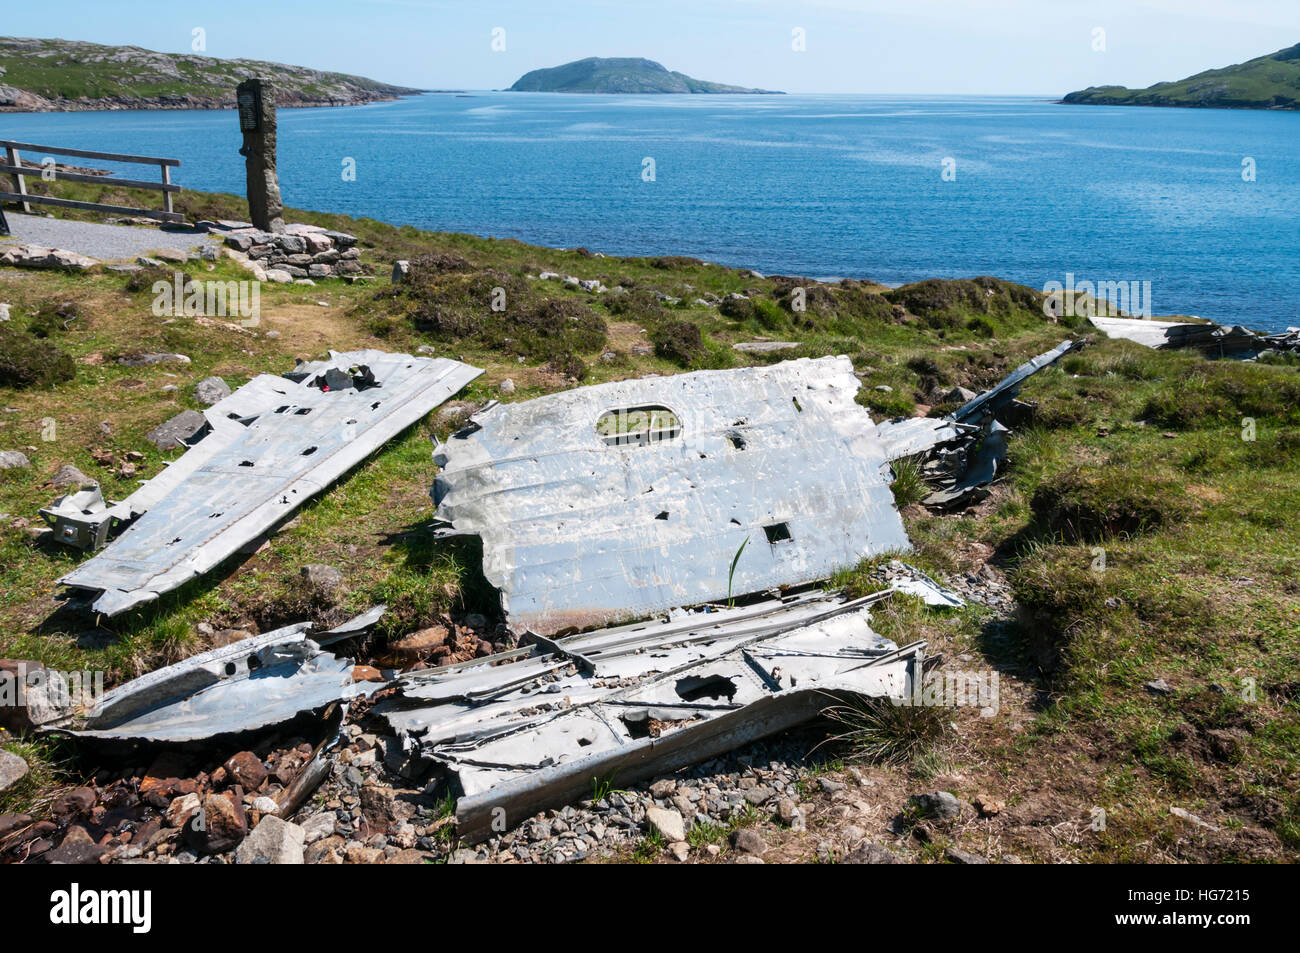 The wreckage of a Catalina Flying Boat that crashed on the island of Vatersay during WWII in 1944. Stock Photo